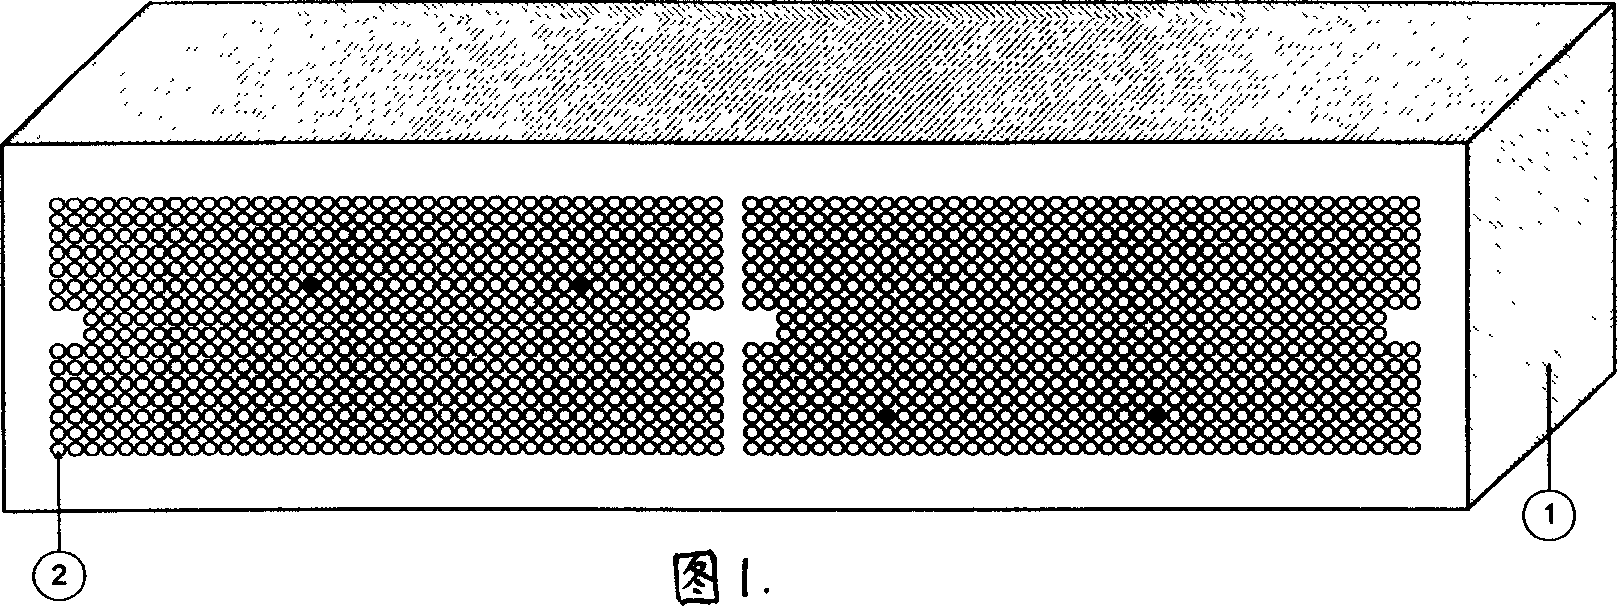 Digitized interface device for controlling movement of driver needle